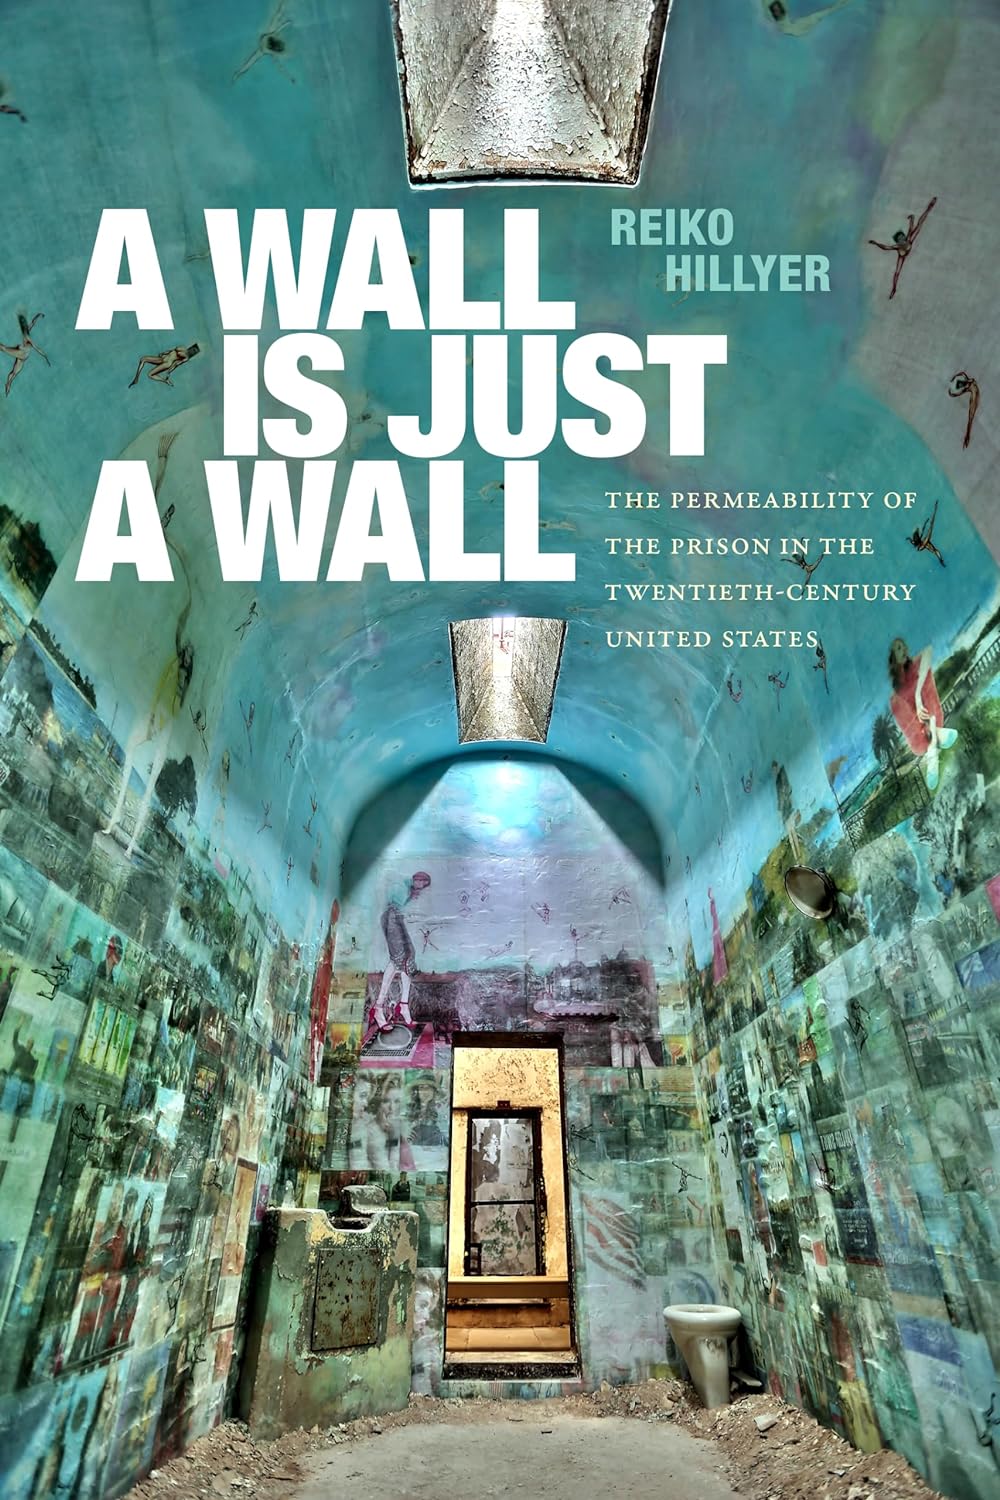 A Wall Is Just a Wall: The Permeability of the Prison in the Twentieth-Century United States by Reiko Hillyer